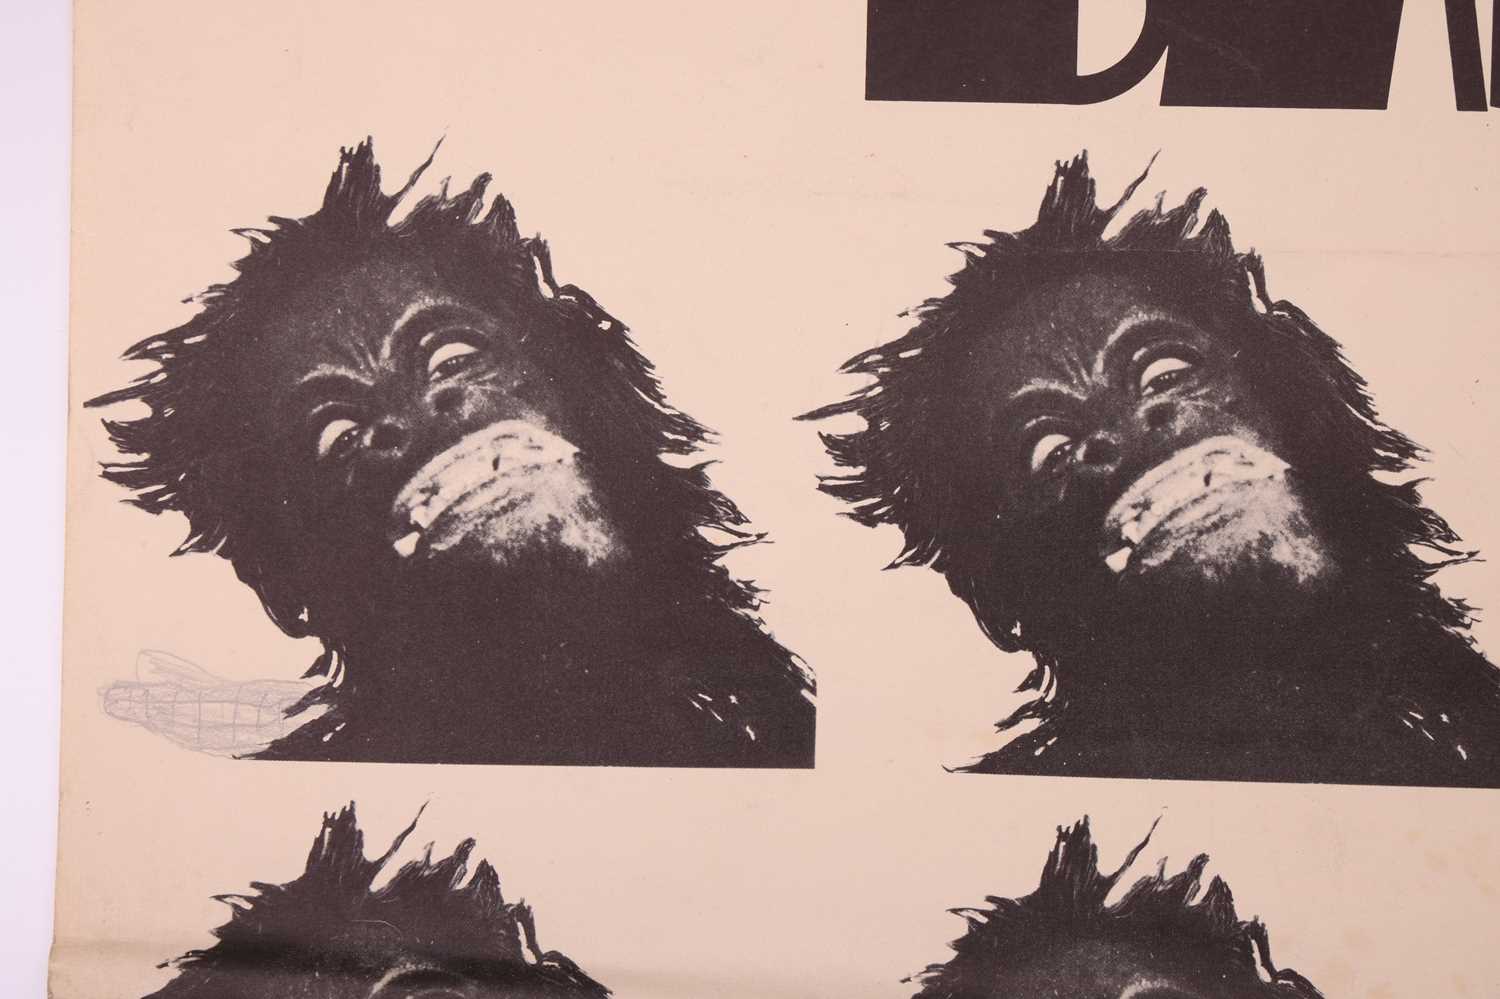 An original and rare Liberty Records promotional poster for 'Gorilla', the 1967 album released by Th - Image 4 of 5